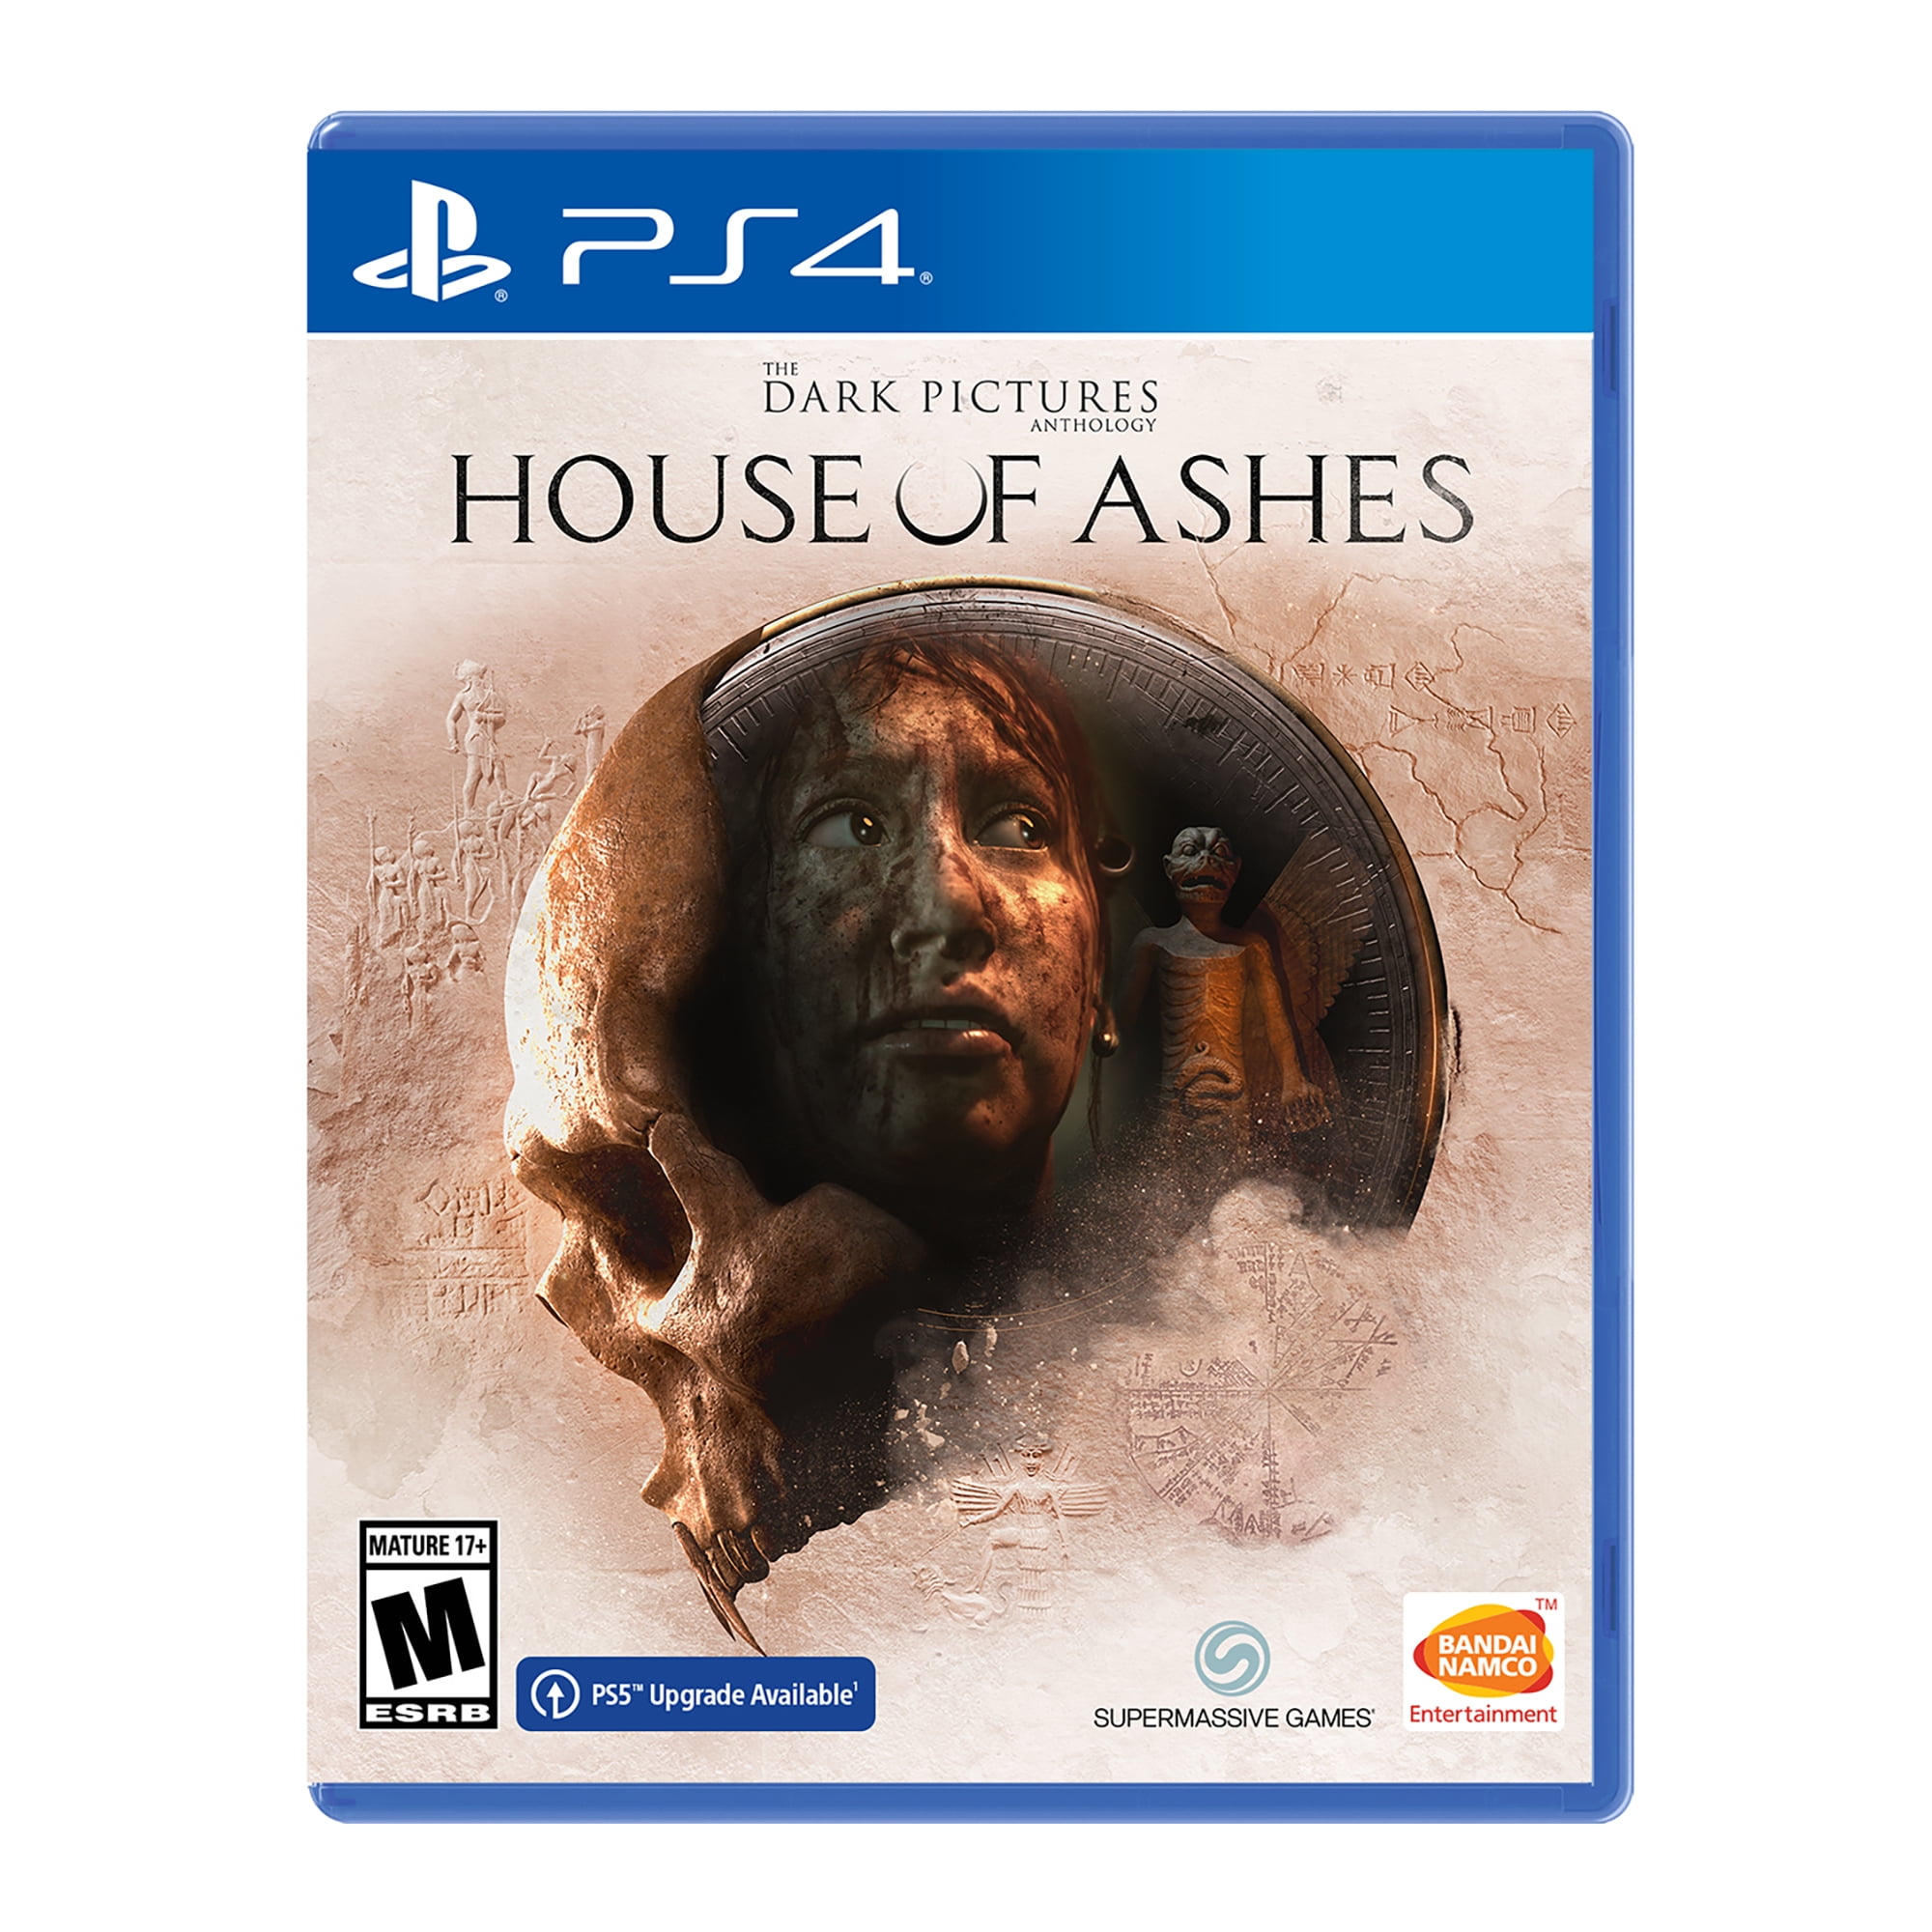 The Dark Pictures Anthology: House Of Ashes, Bandai Namco, PlayStation 4 Walmart.com